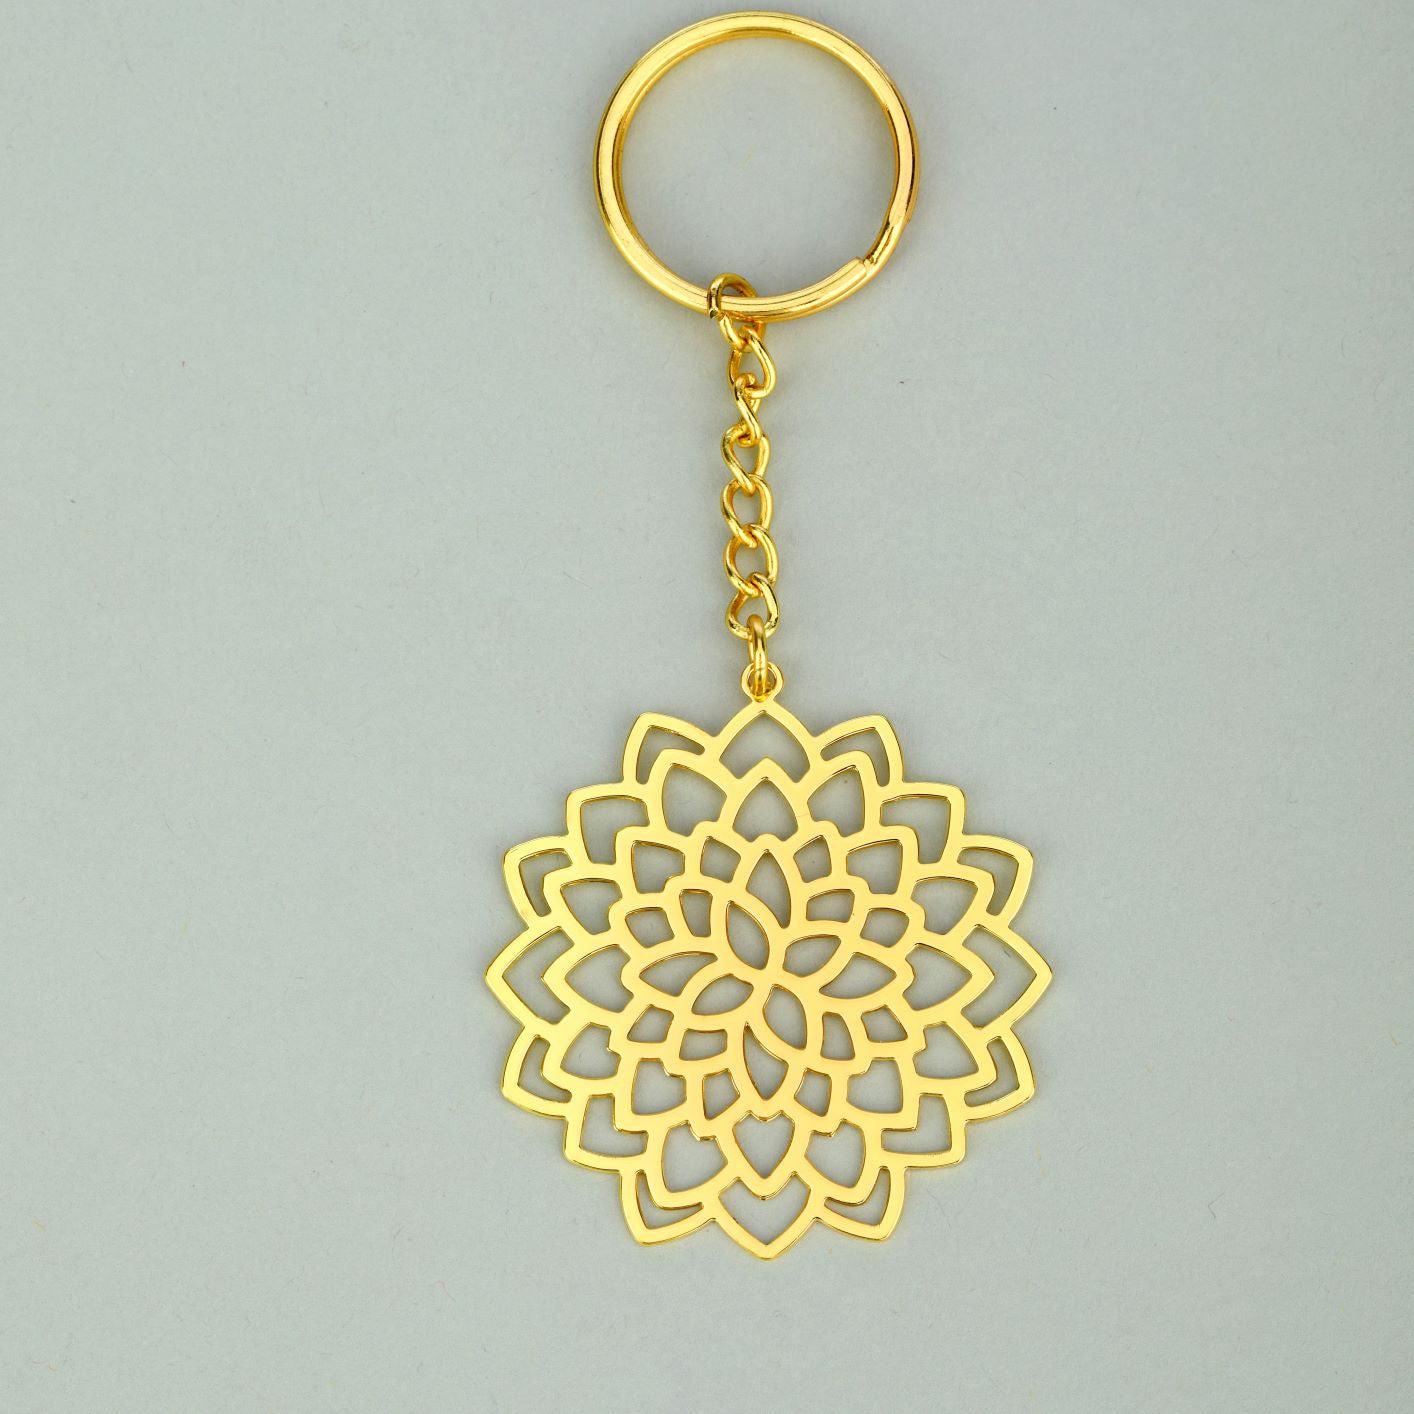 Adoraa's Rythym Collection Lotus Brass Key Chain